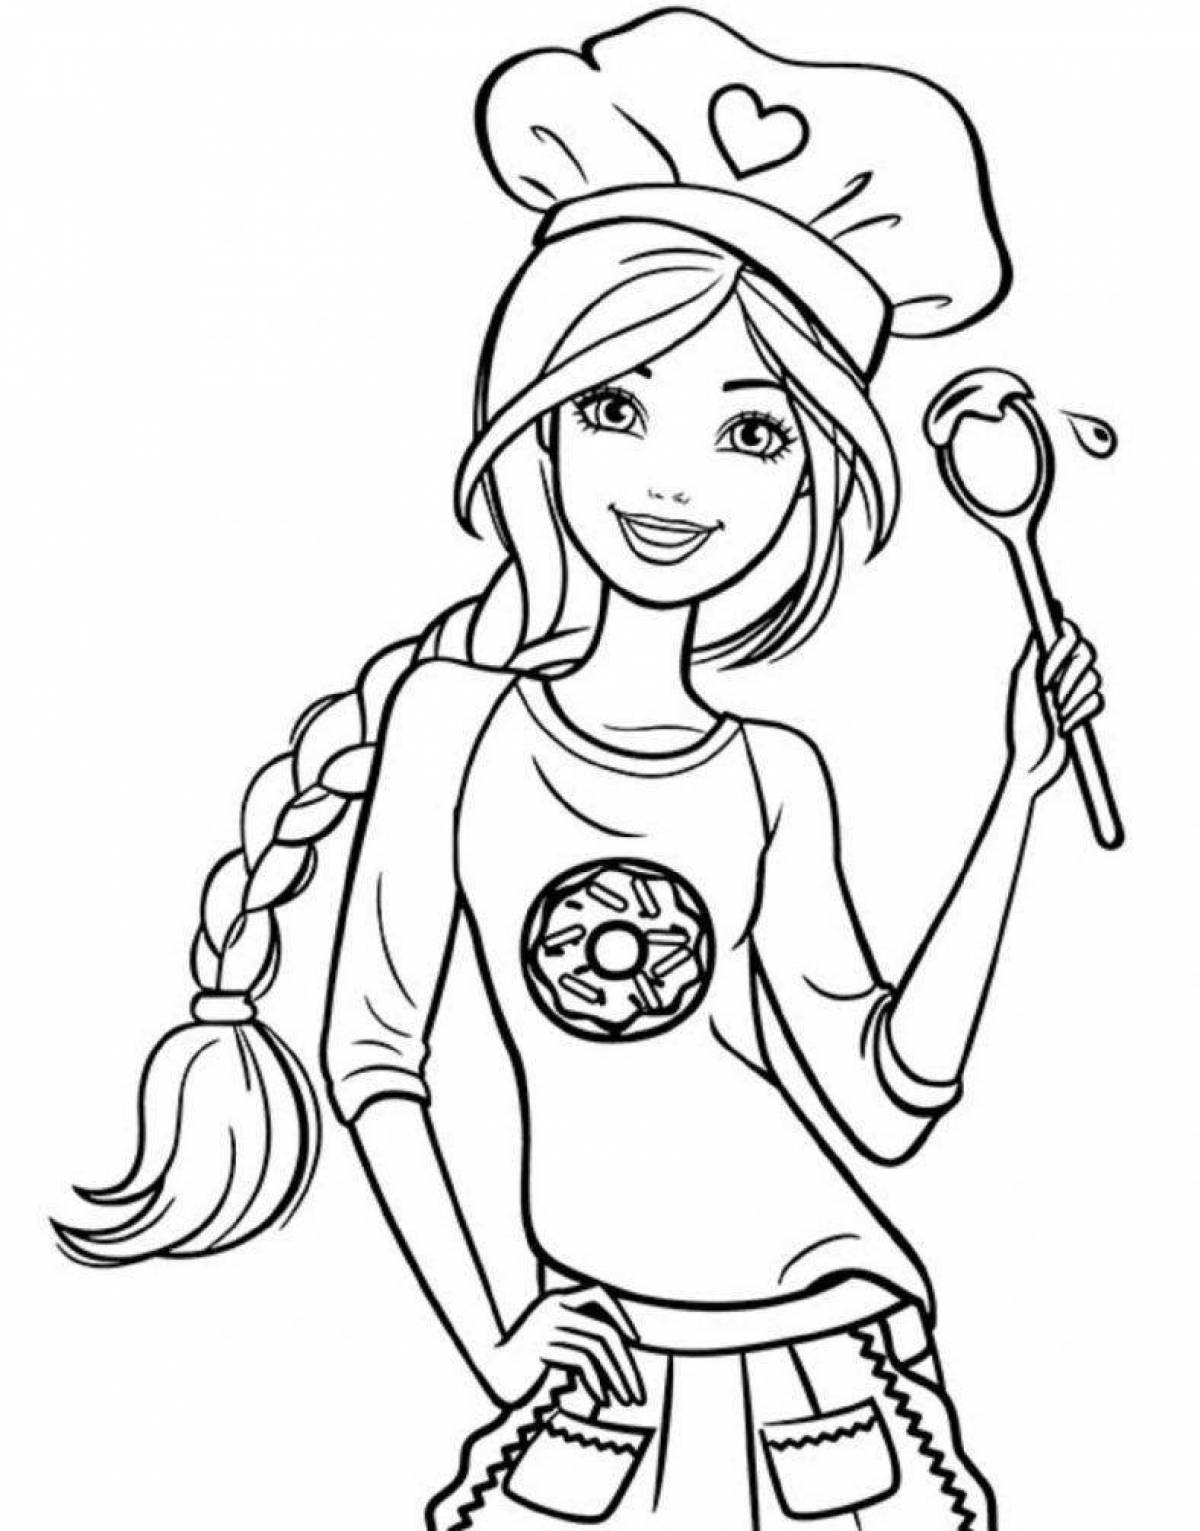 Colorful coloring page with barbie projector